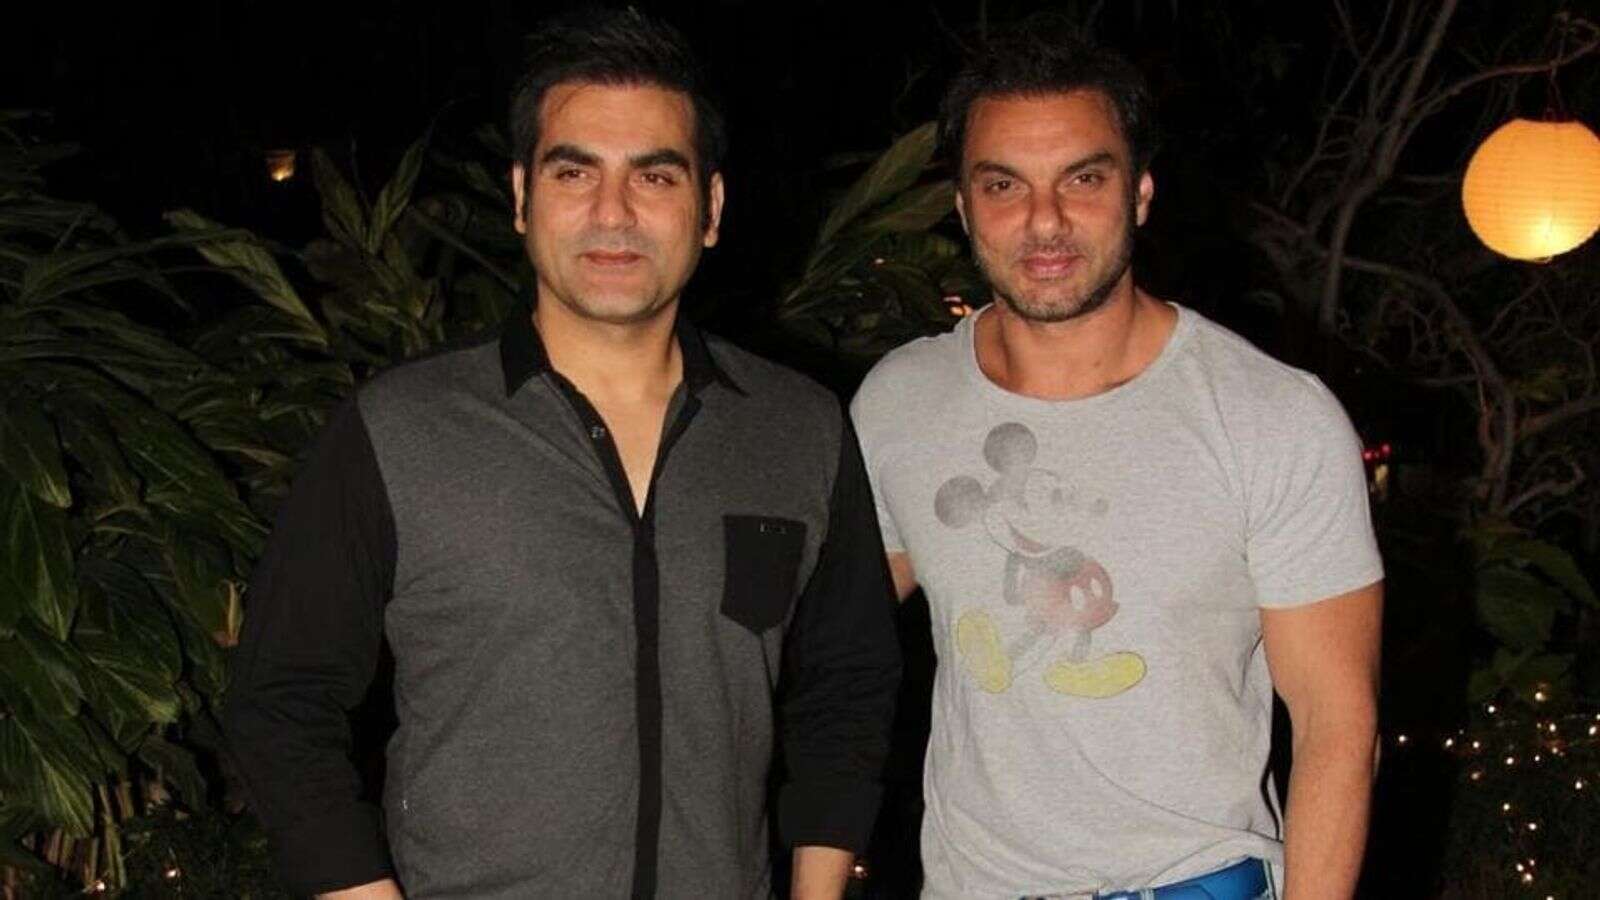 uae: arbaaz, sohail khan get candid at first-ever open podcast event